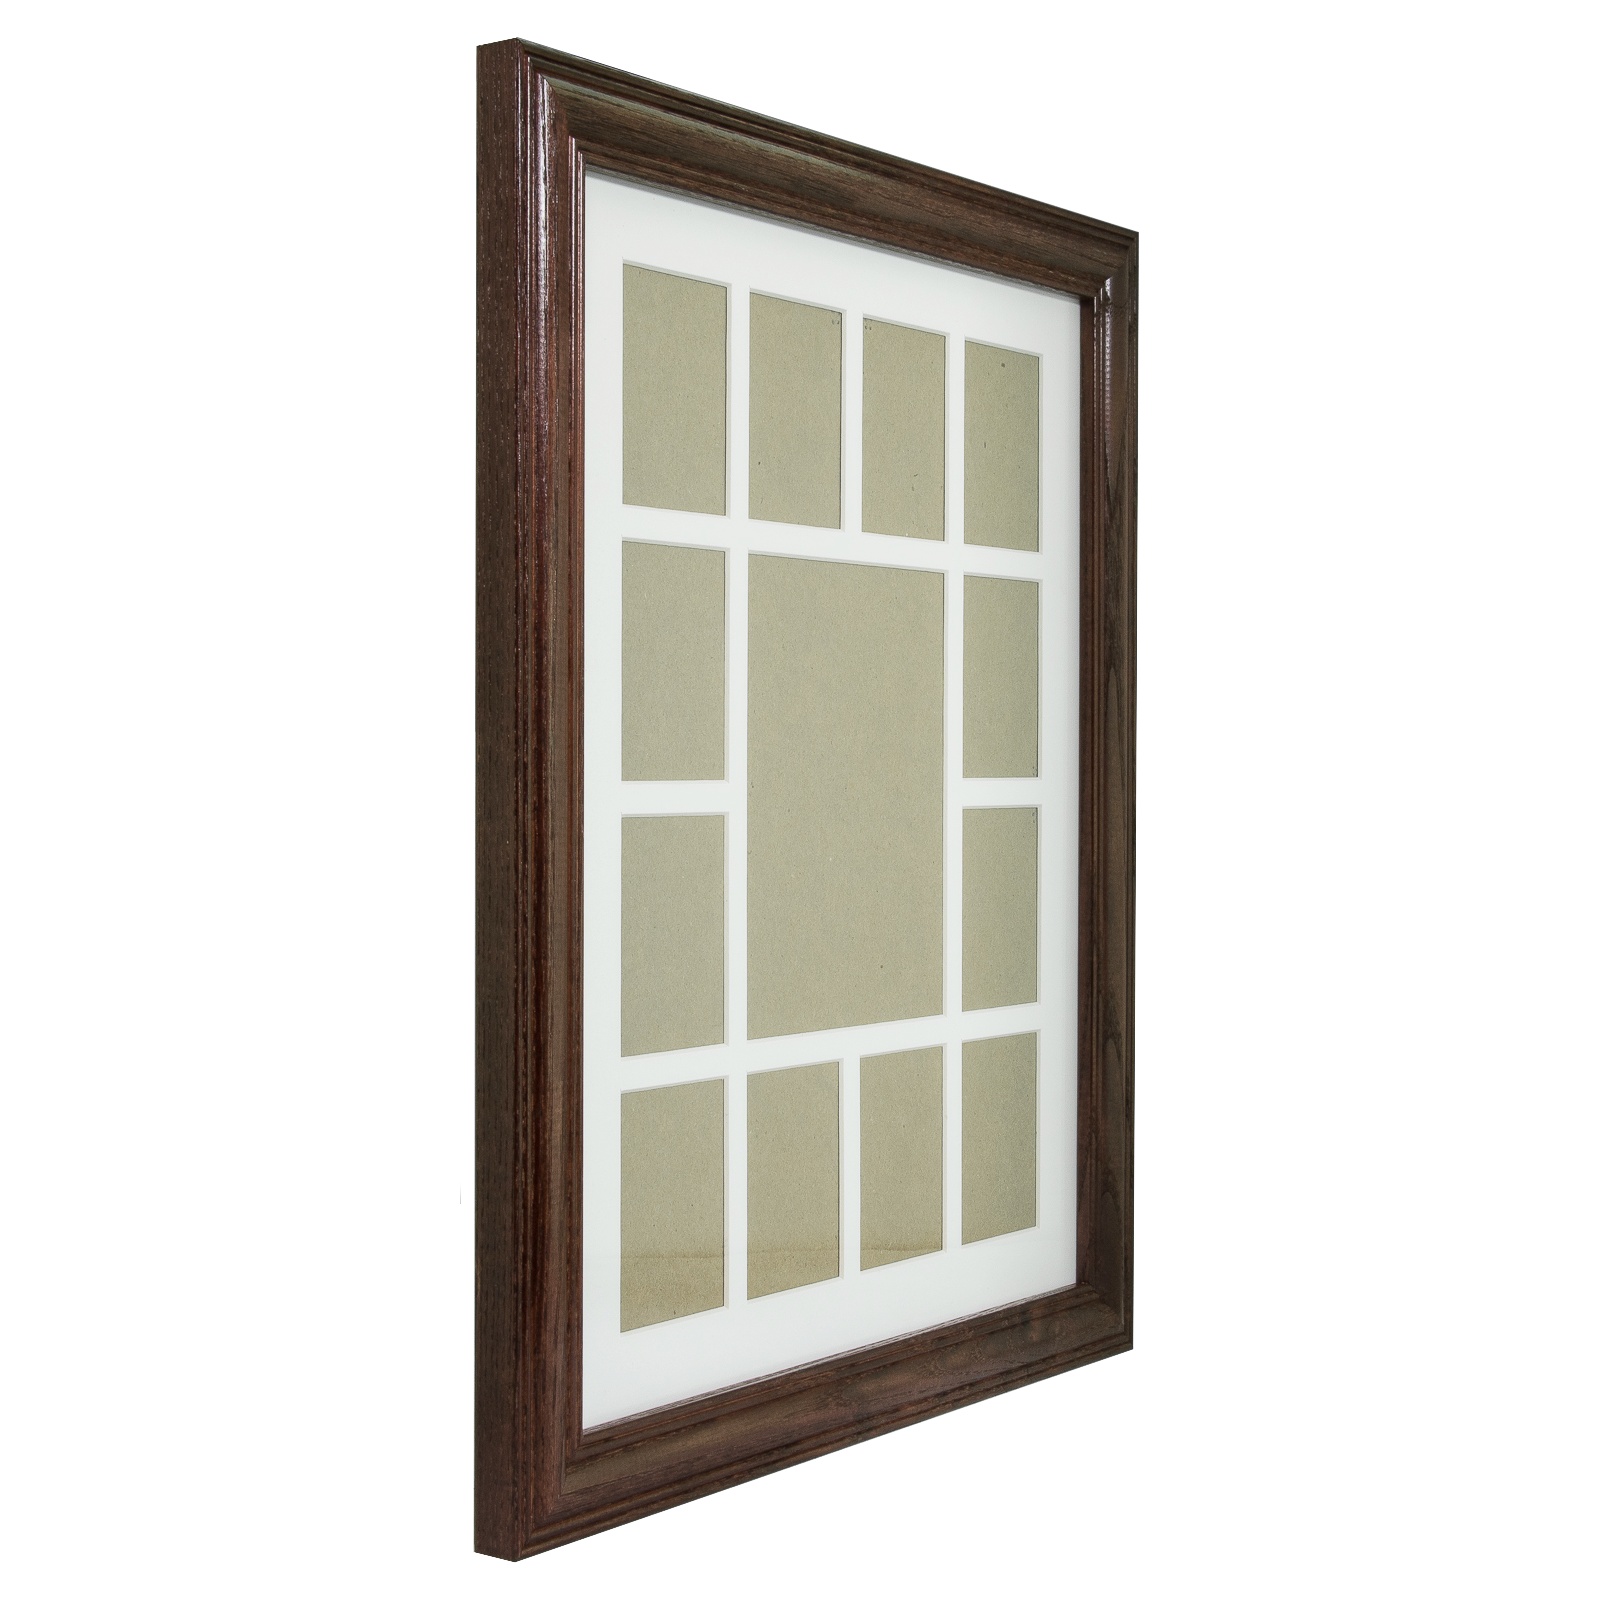 Craig Frames, 12x16 Cherry Wood Picture Frame, White Collage Mat, 13